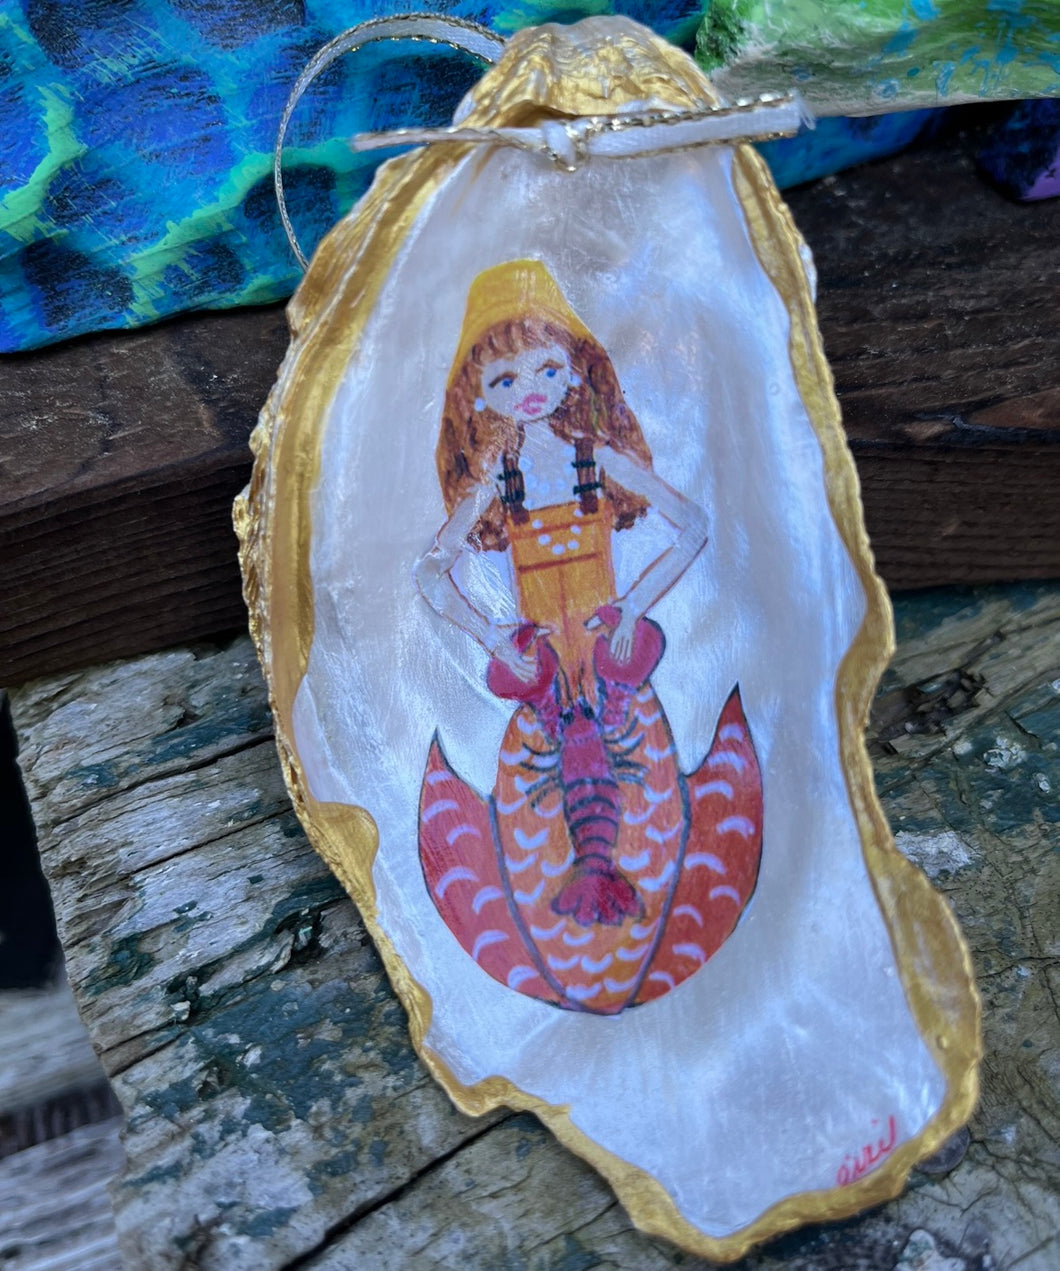 Mermaid with lobster oyster shell ornament